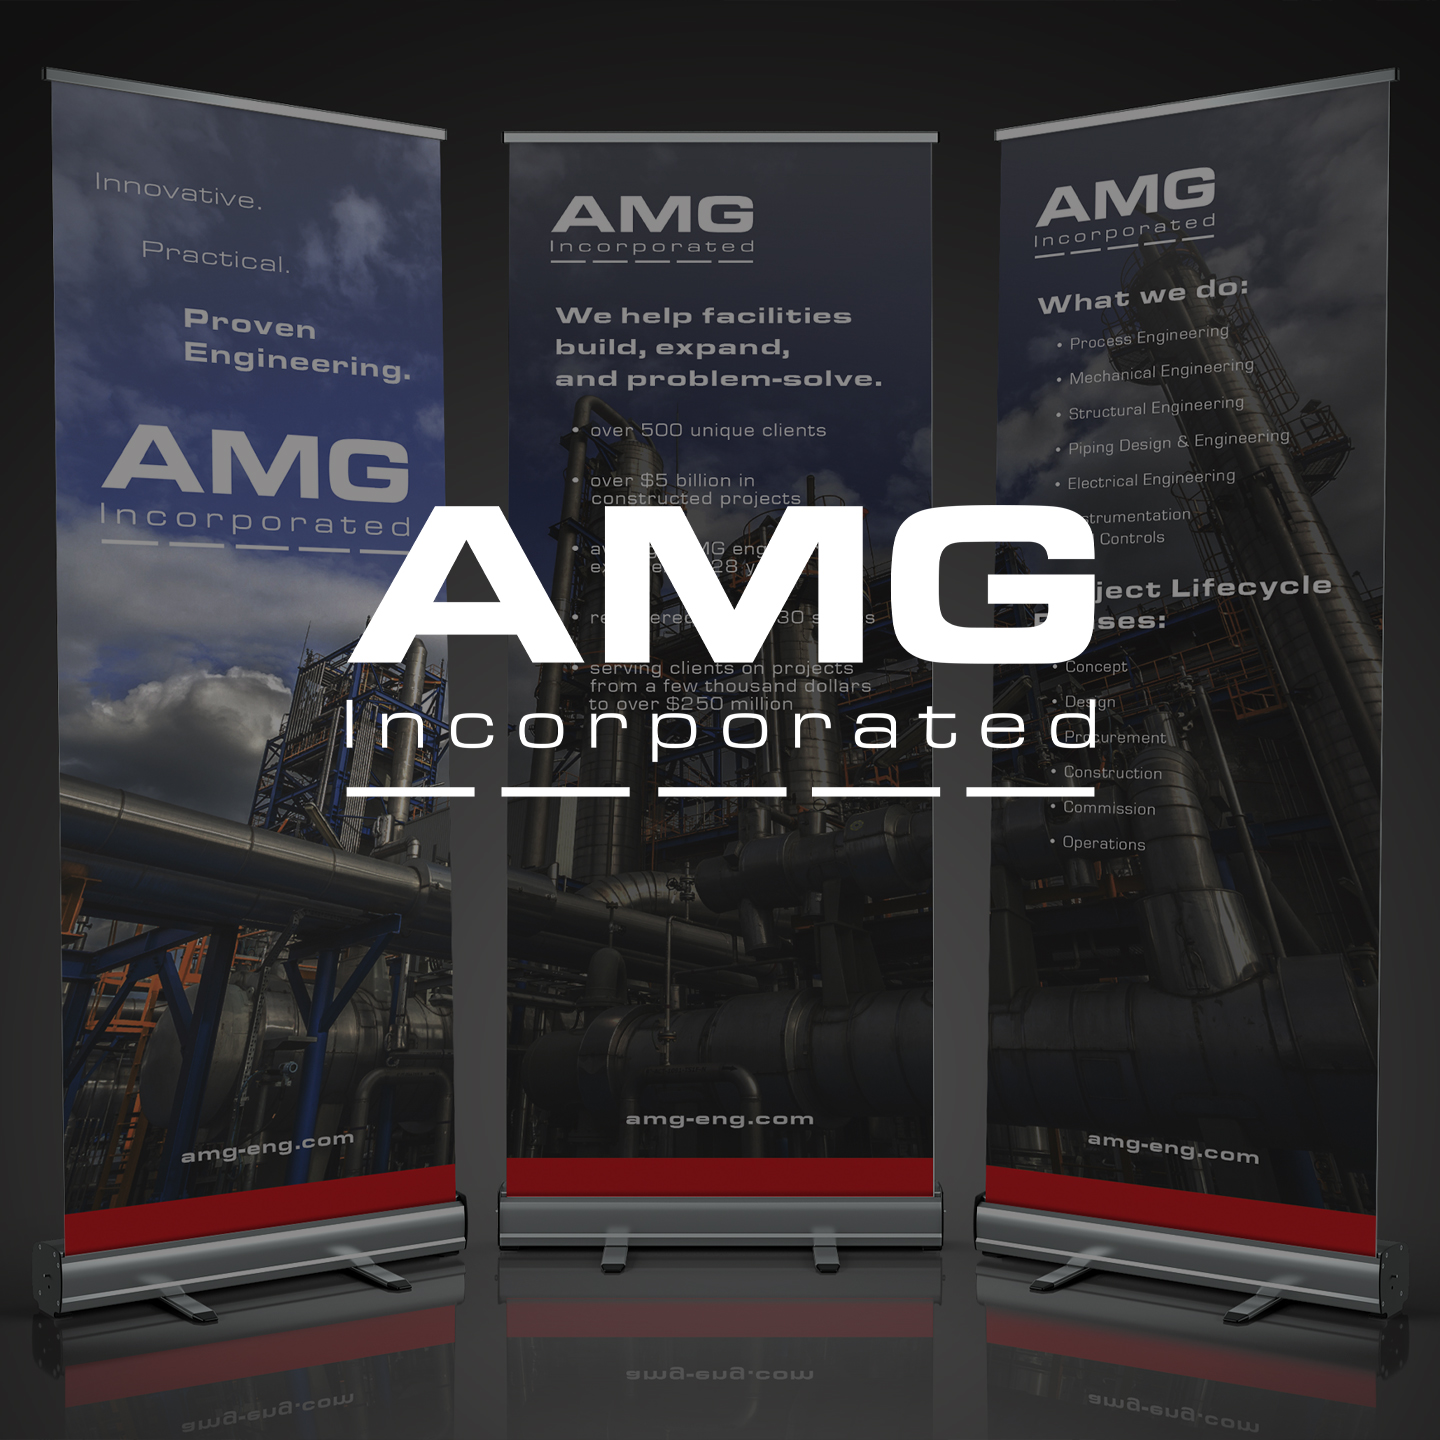 AMG Incorporated